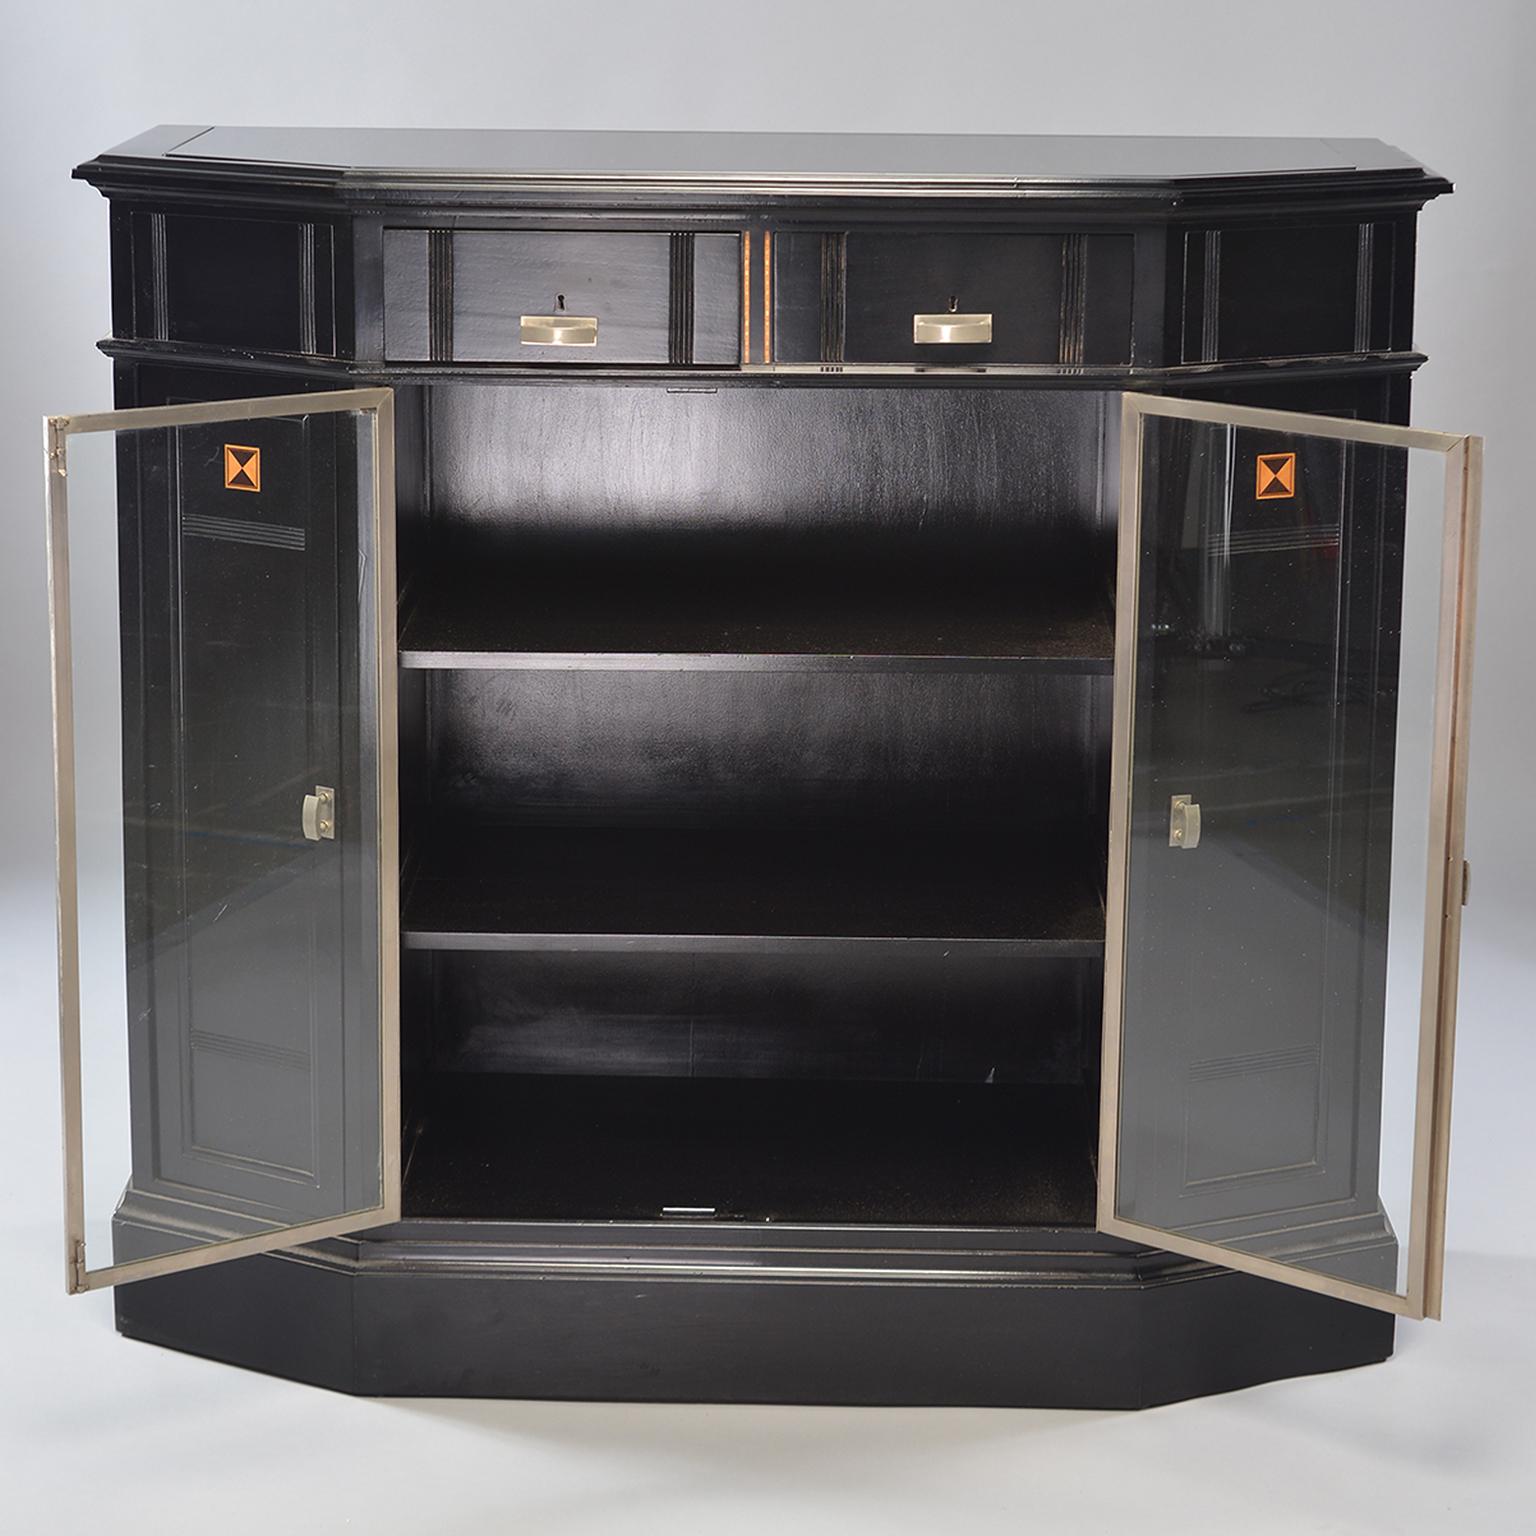 Belgian Ebonized Art Deco Cabinet with Aluminum Trim and Glass Fronted Doors